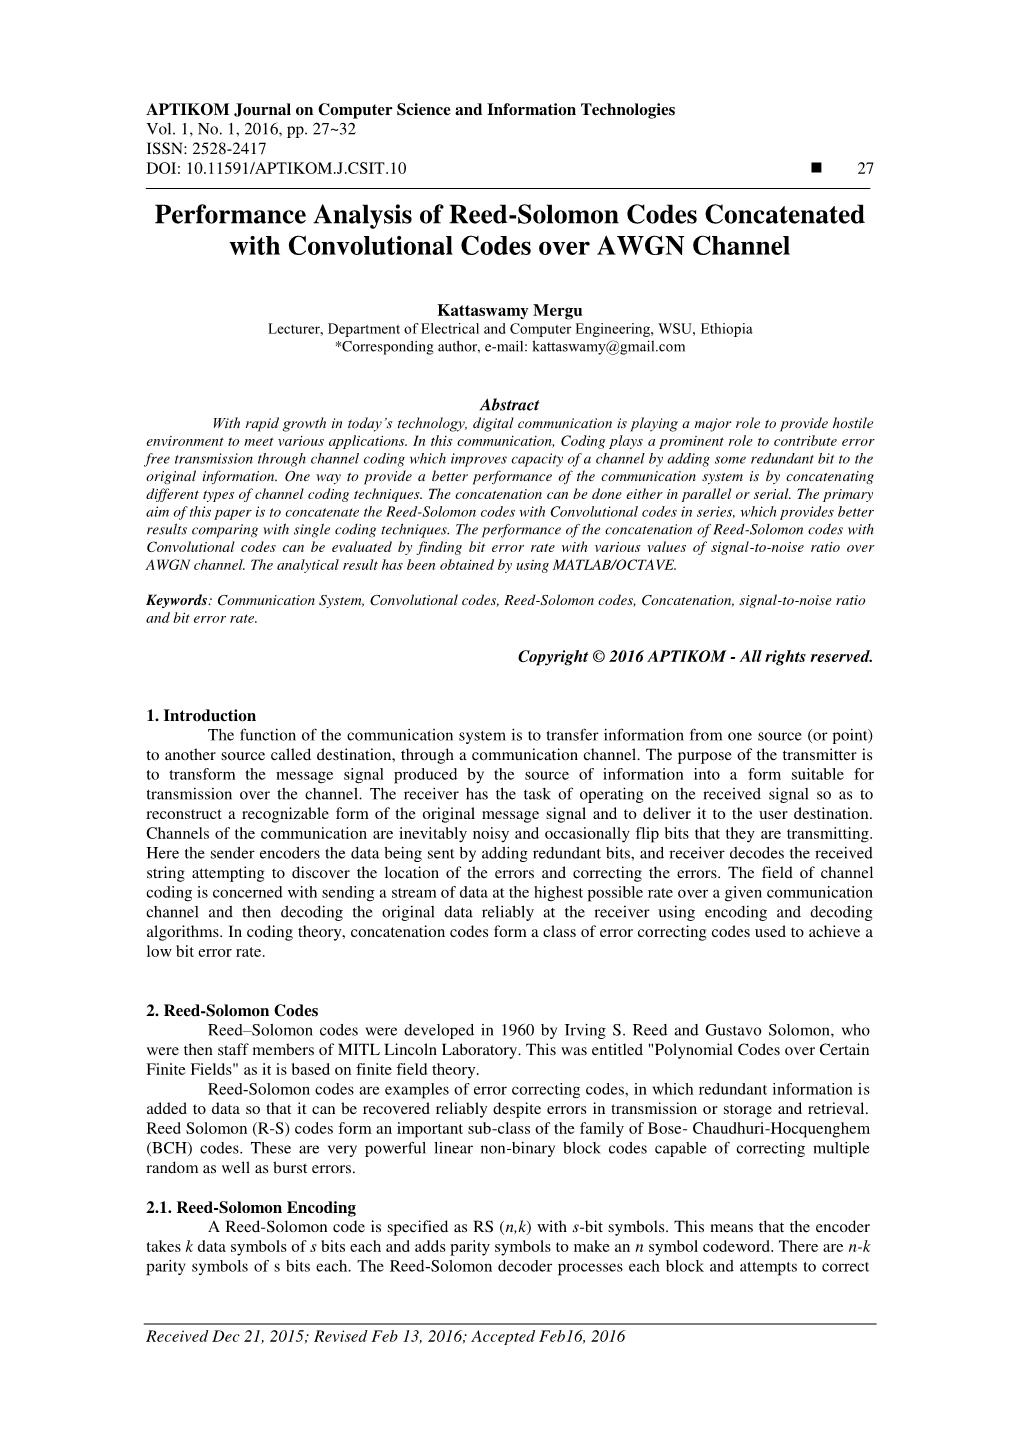 Performance Analysis of Reed-Solomon Codes Concatenated with Convolutional Codes Over AWGN Channel